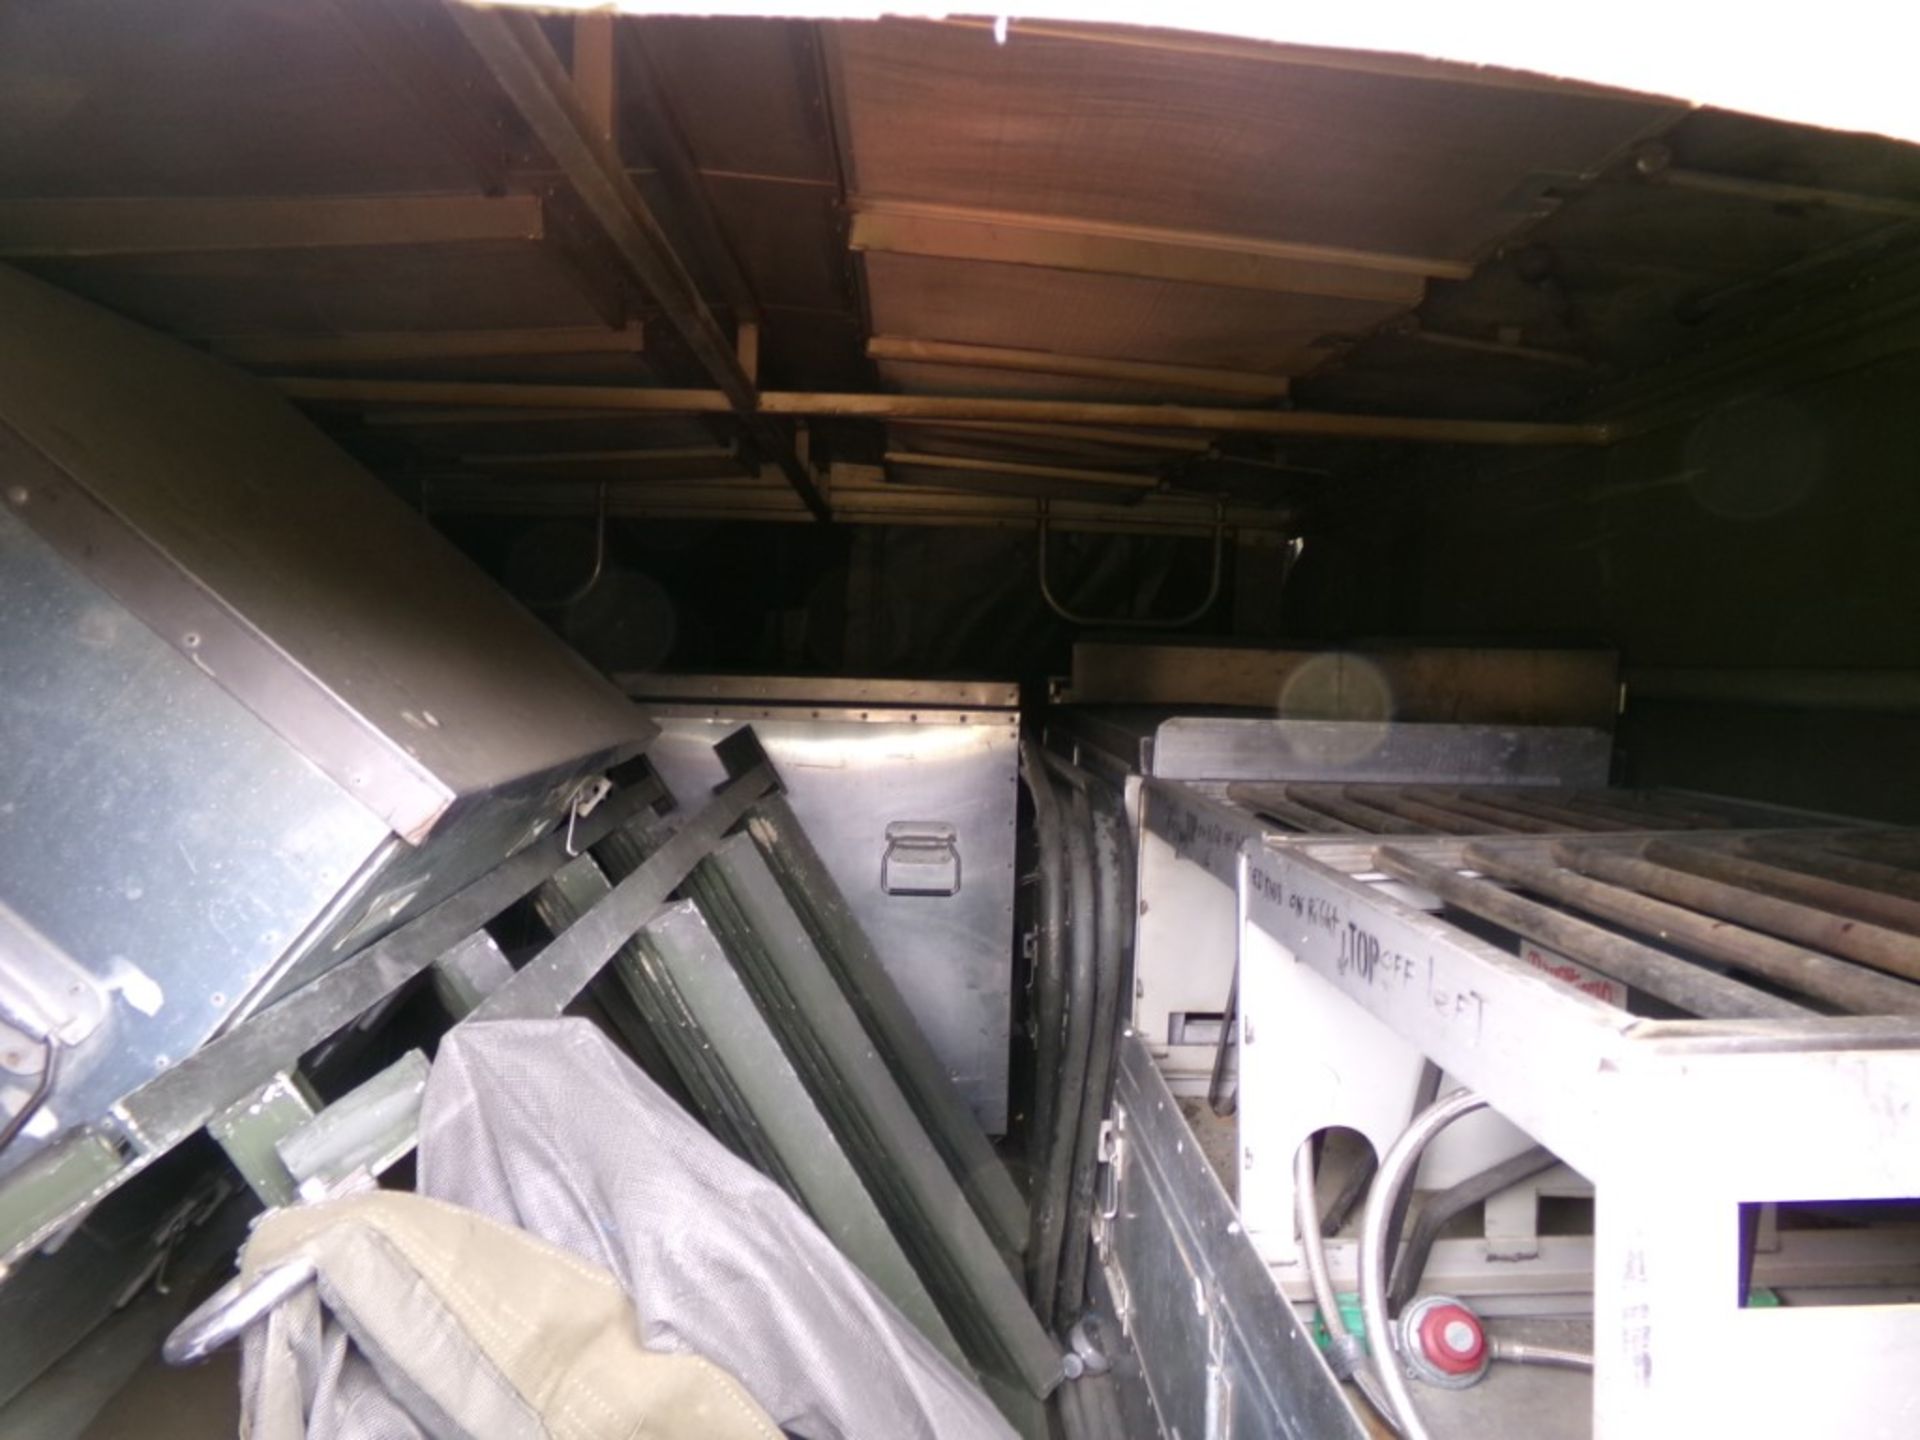 Military ''Kitchen Field Trailer'' with Soft Cover, 1492/1492, Equipped with Propane Kitchen - Image 2 of 3